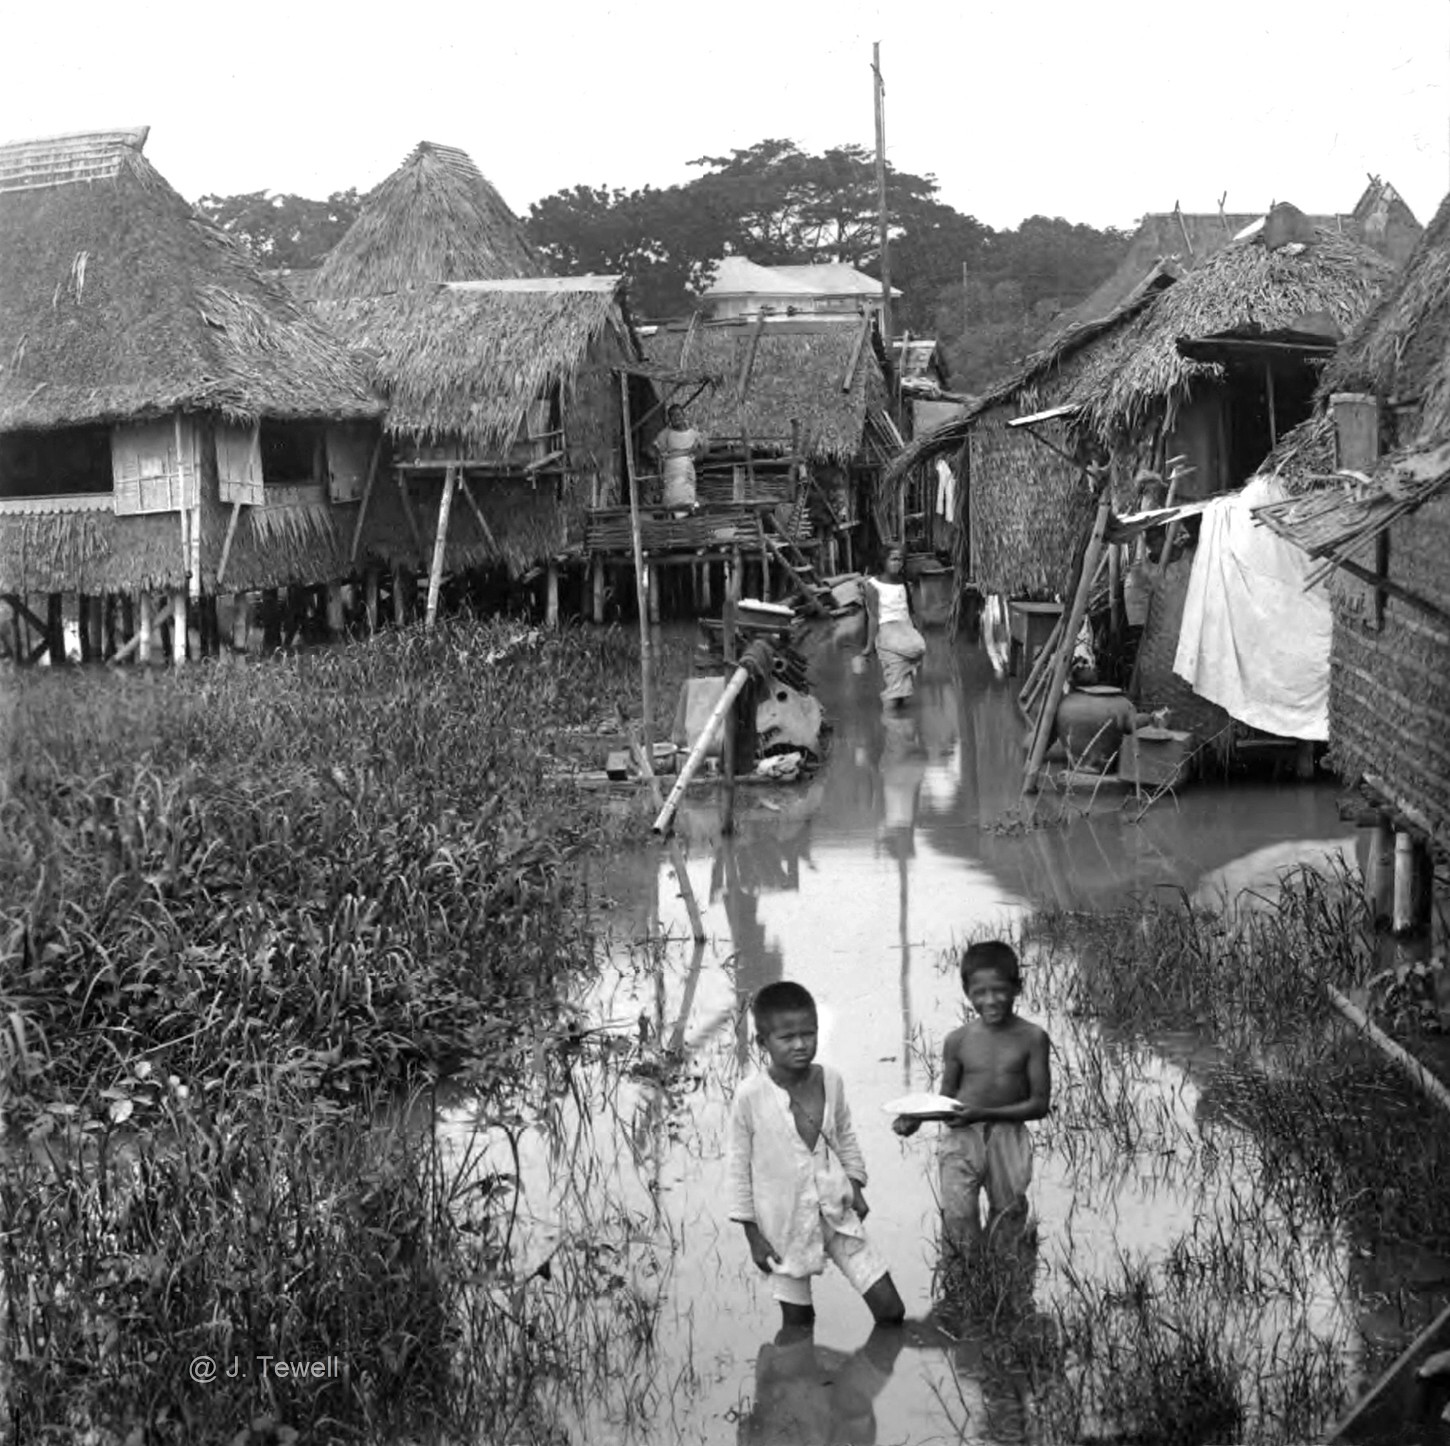 Flood tide in the outskirts of Manila among homes built on piles, early 20th Century, Philippines